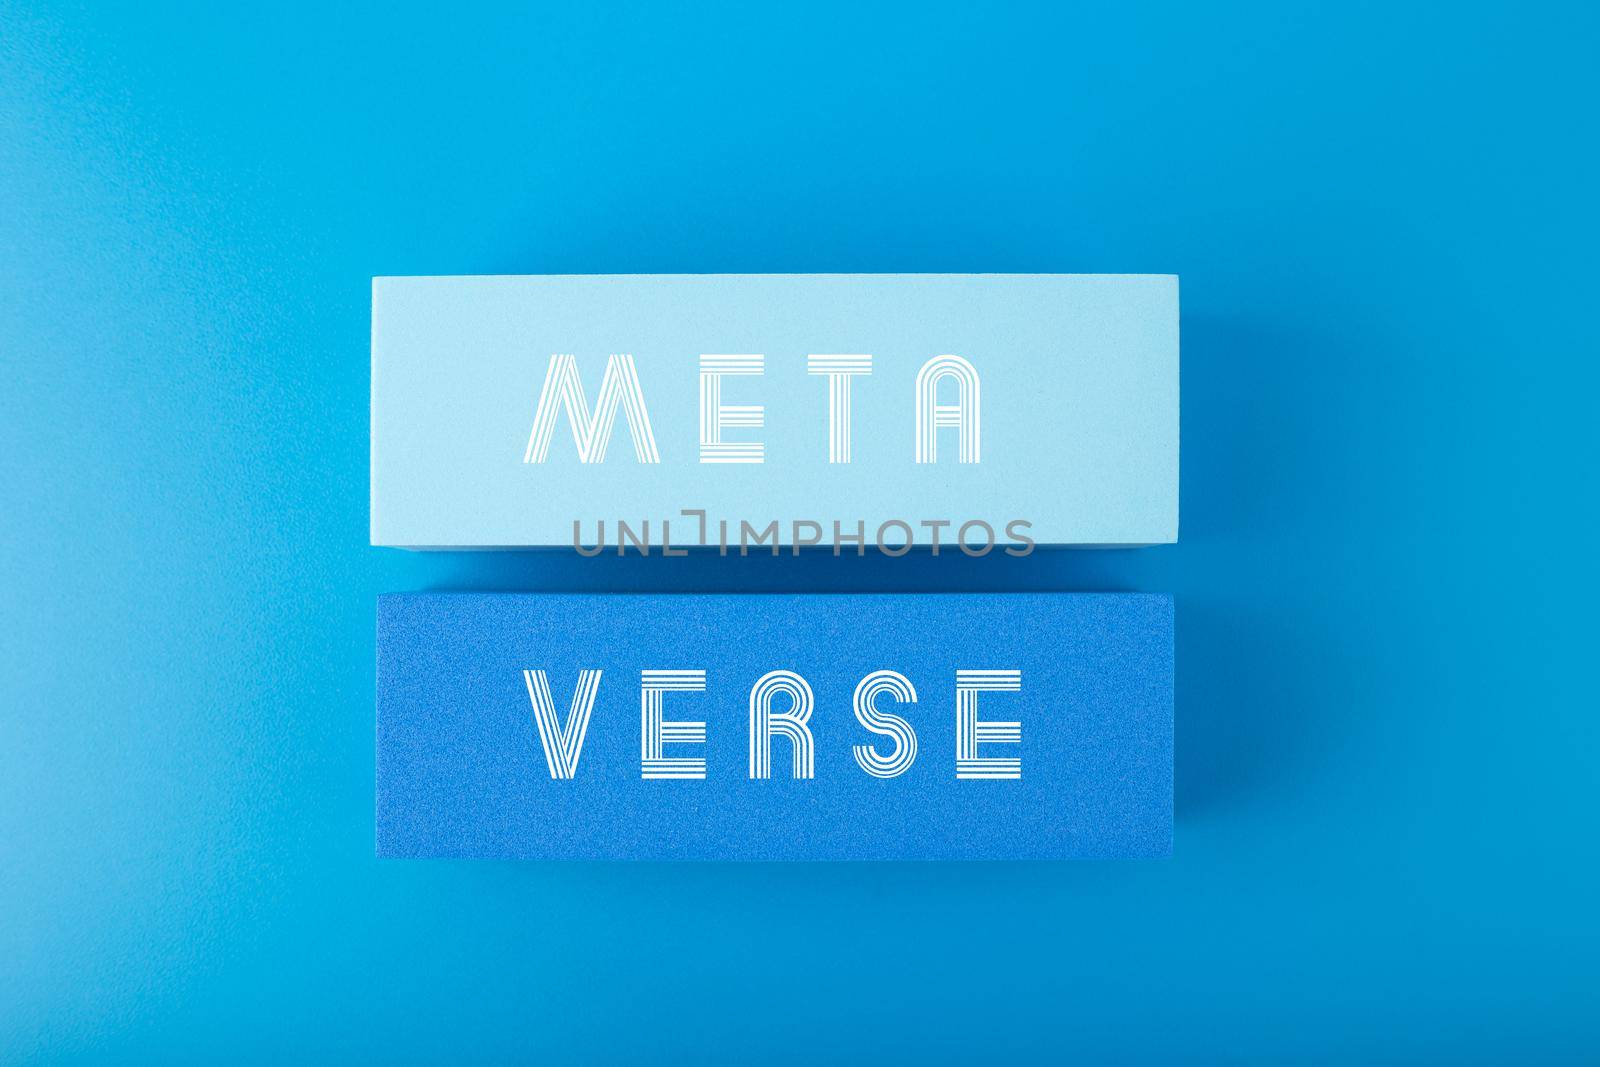 Metaverse modern minimal concept in blue colors. Written metaverse single word on blue rectangles against blue background. Future technologies. 